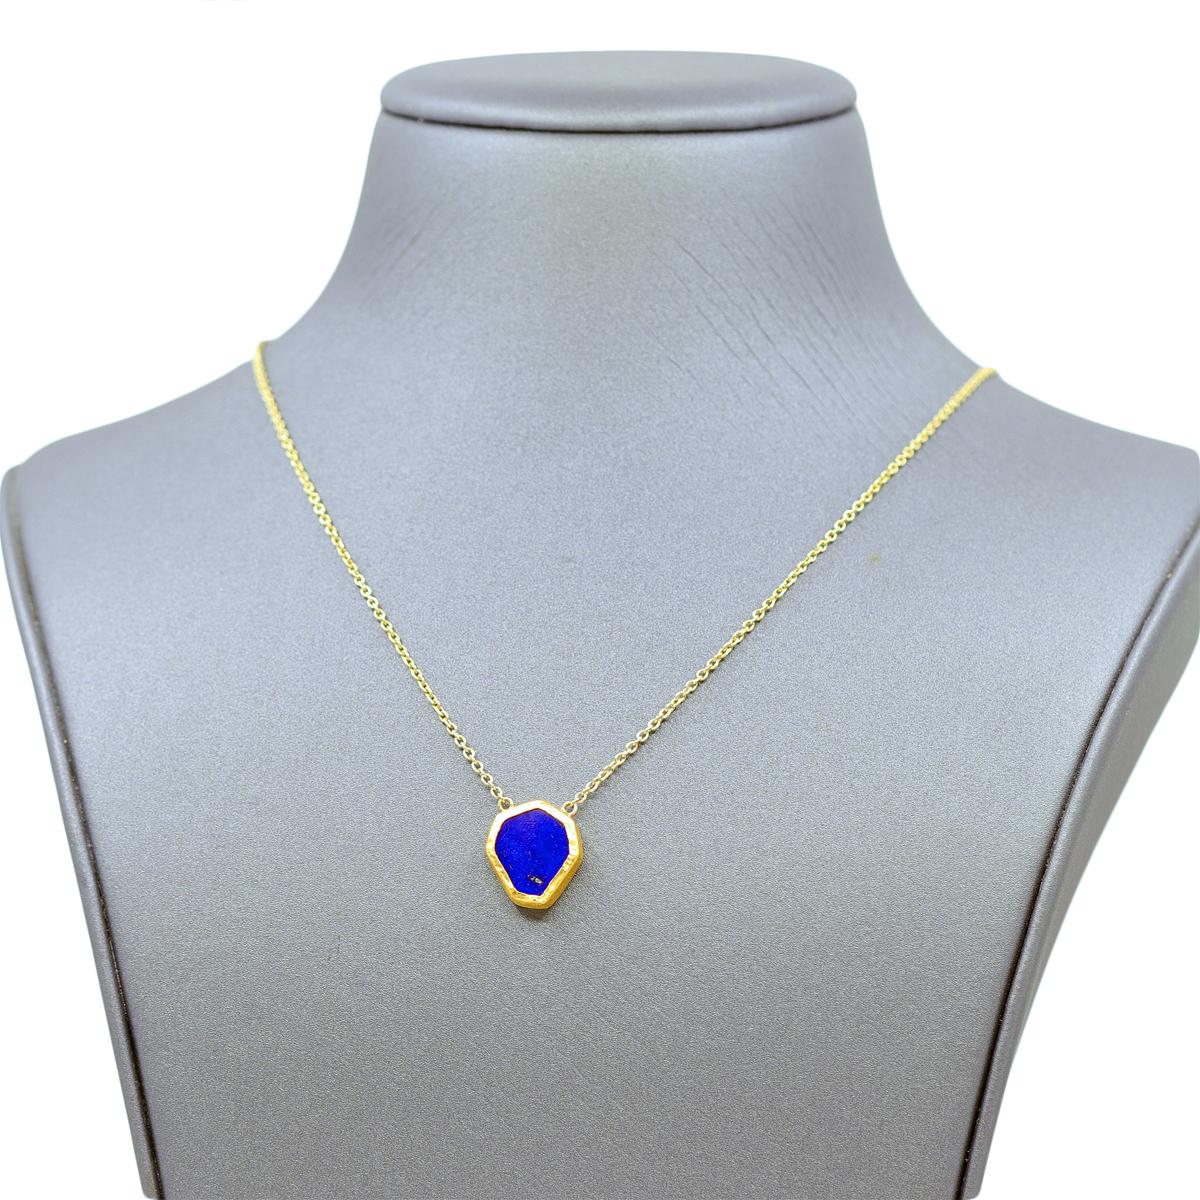 Lapis Drop Necklace by renowned jewelry maker Devta Doolan featuring a deep blue lapis lazuli heptagon hand-fabricated in Devta's intricately-finished 22k yellow gold on a 22 inch hand-finished 18k yellow gold chain. Total Length with drop - 22.5